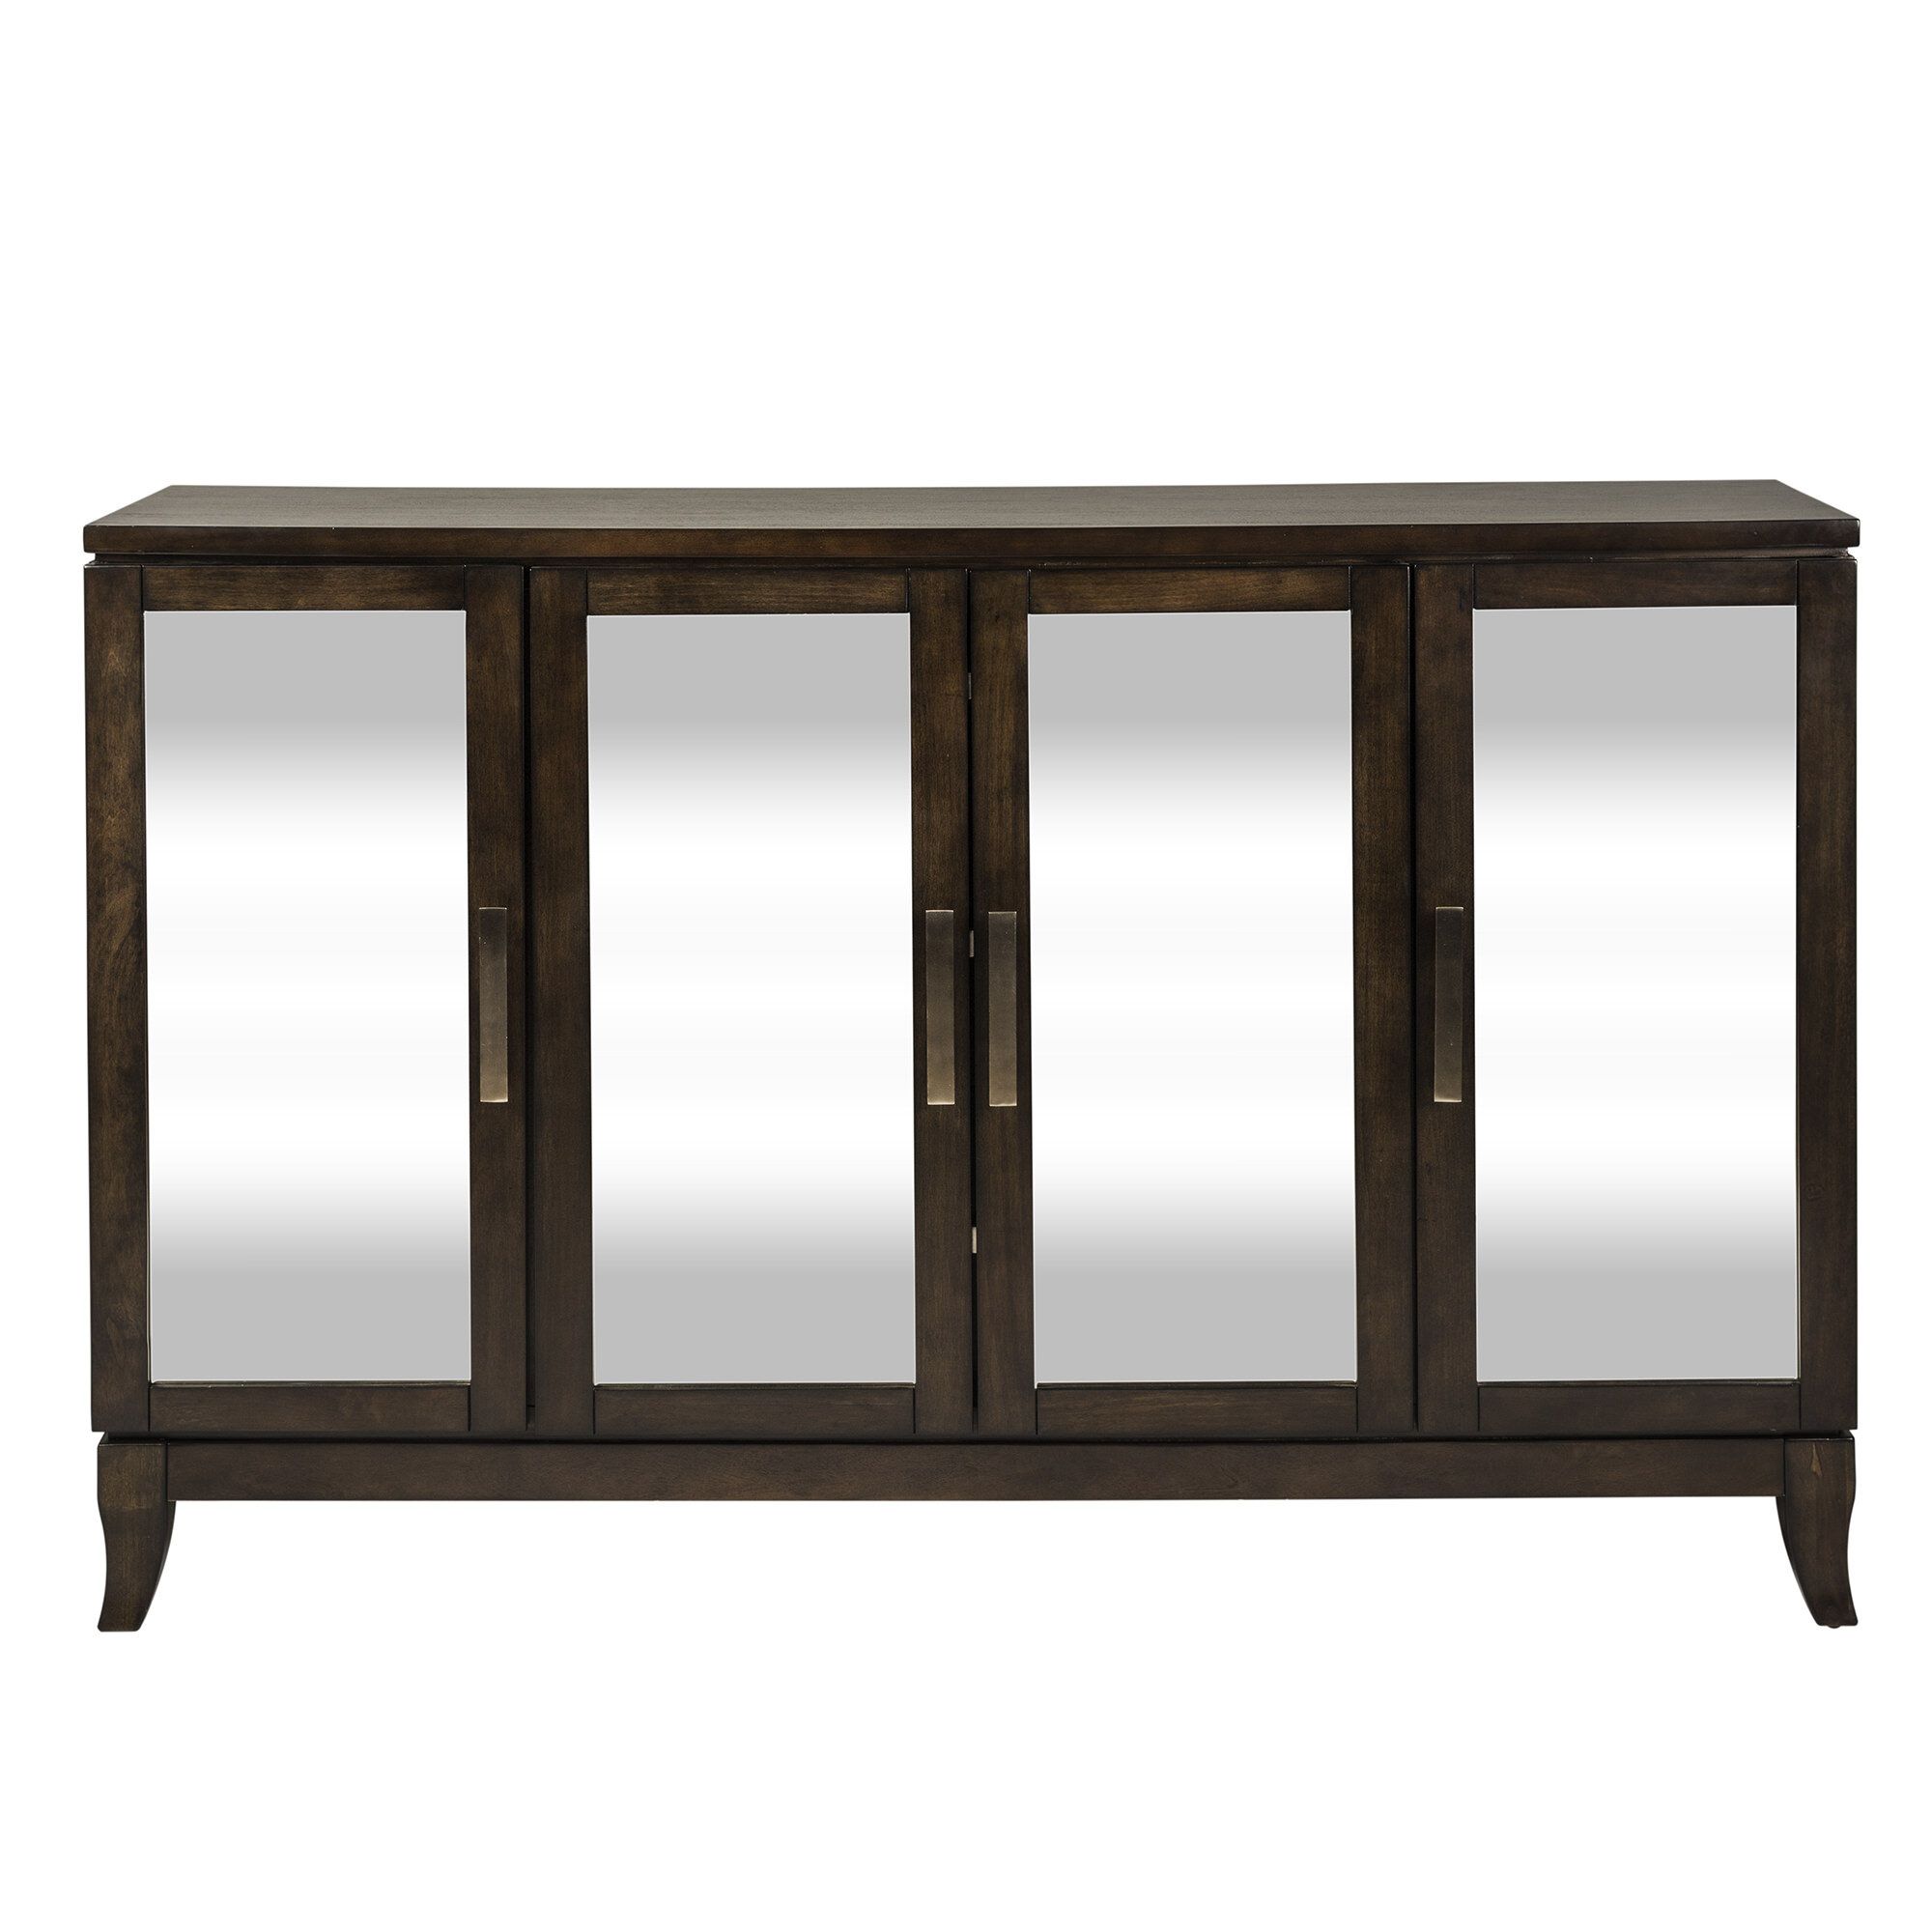 Willa Arlo Interiors Borel Sideboard With Mauldin Sideboards (View 30 of 30)